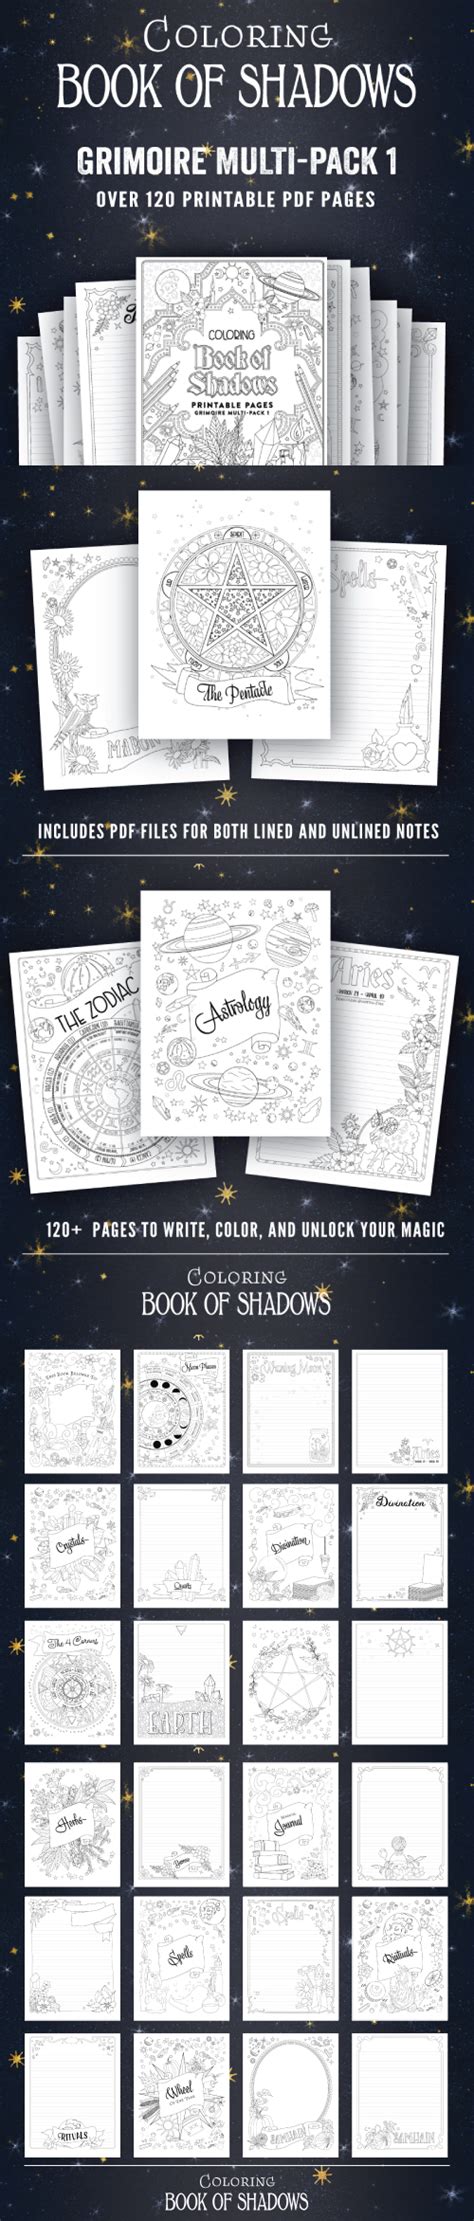 printable book of shadows pages free